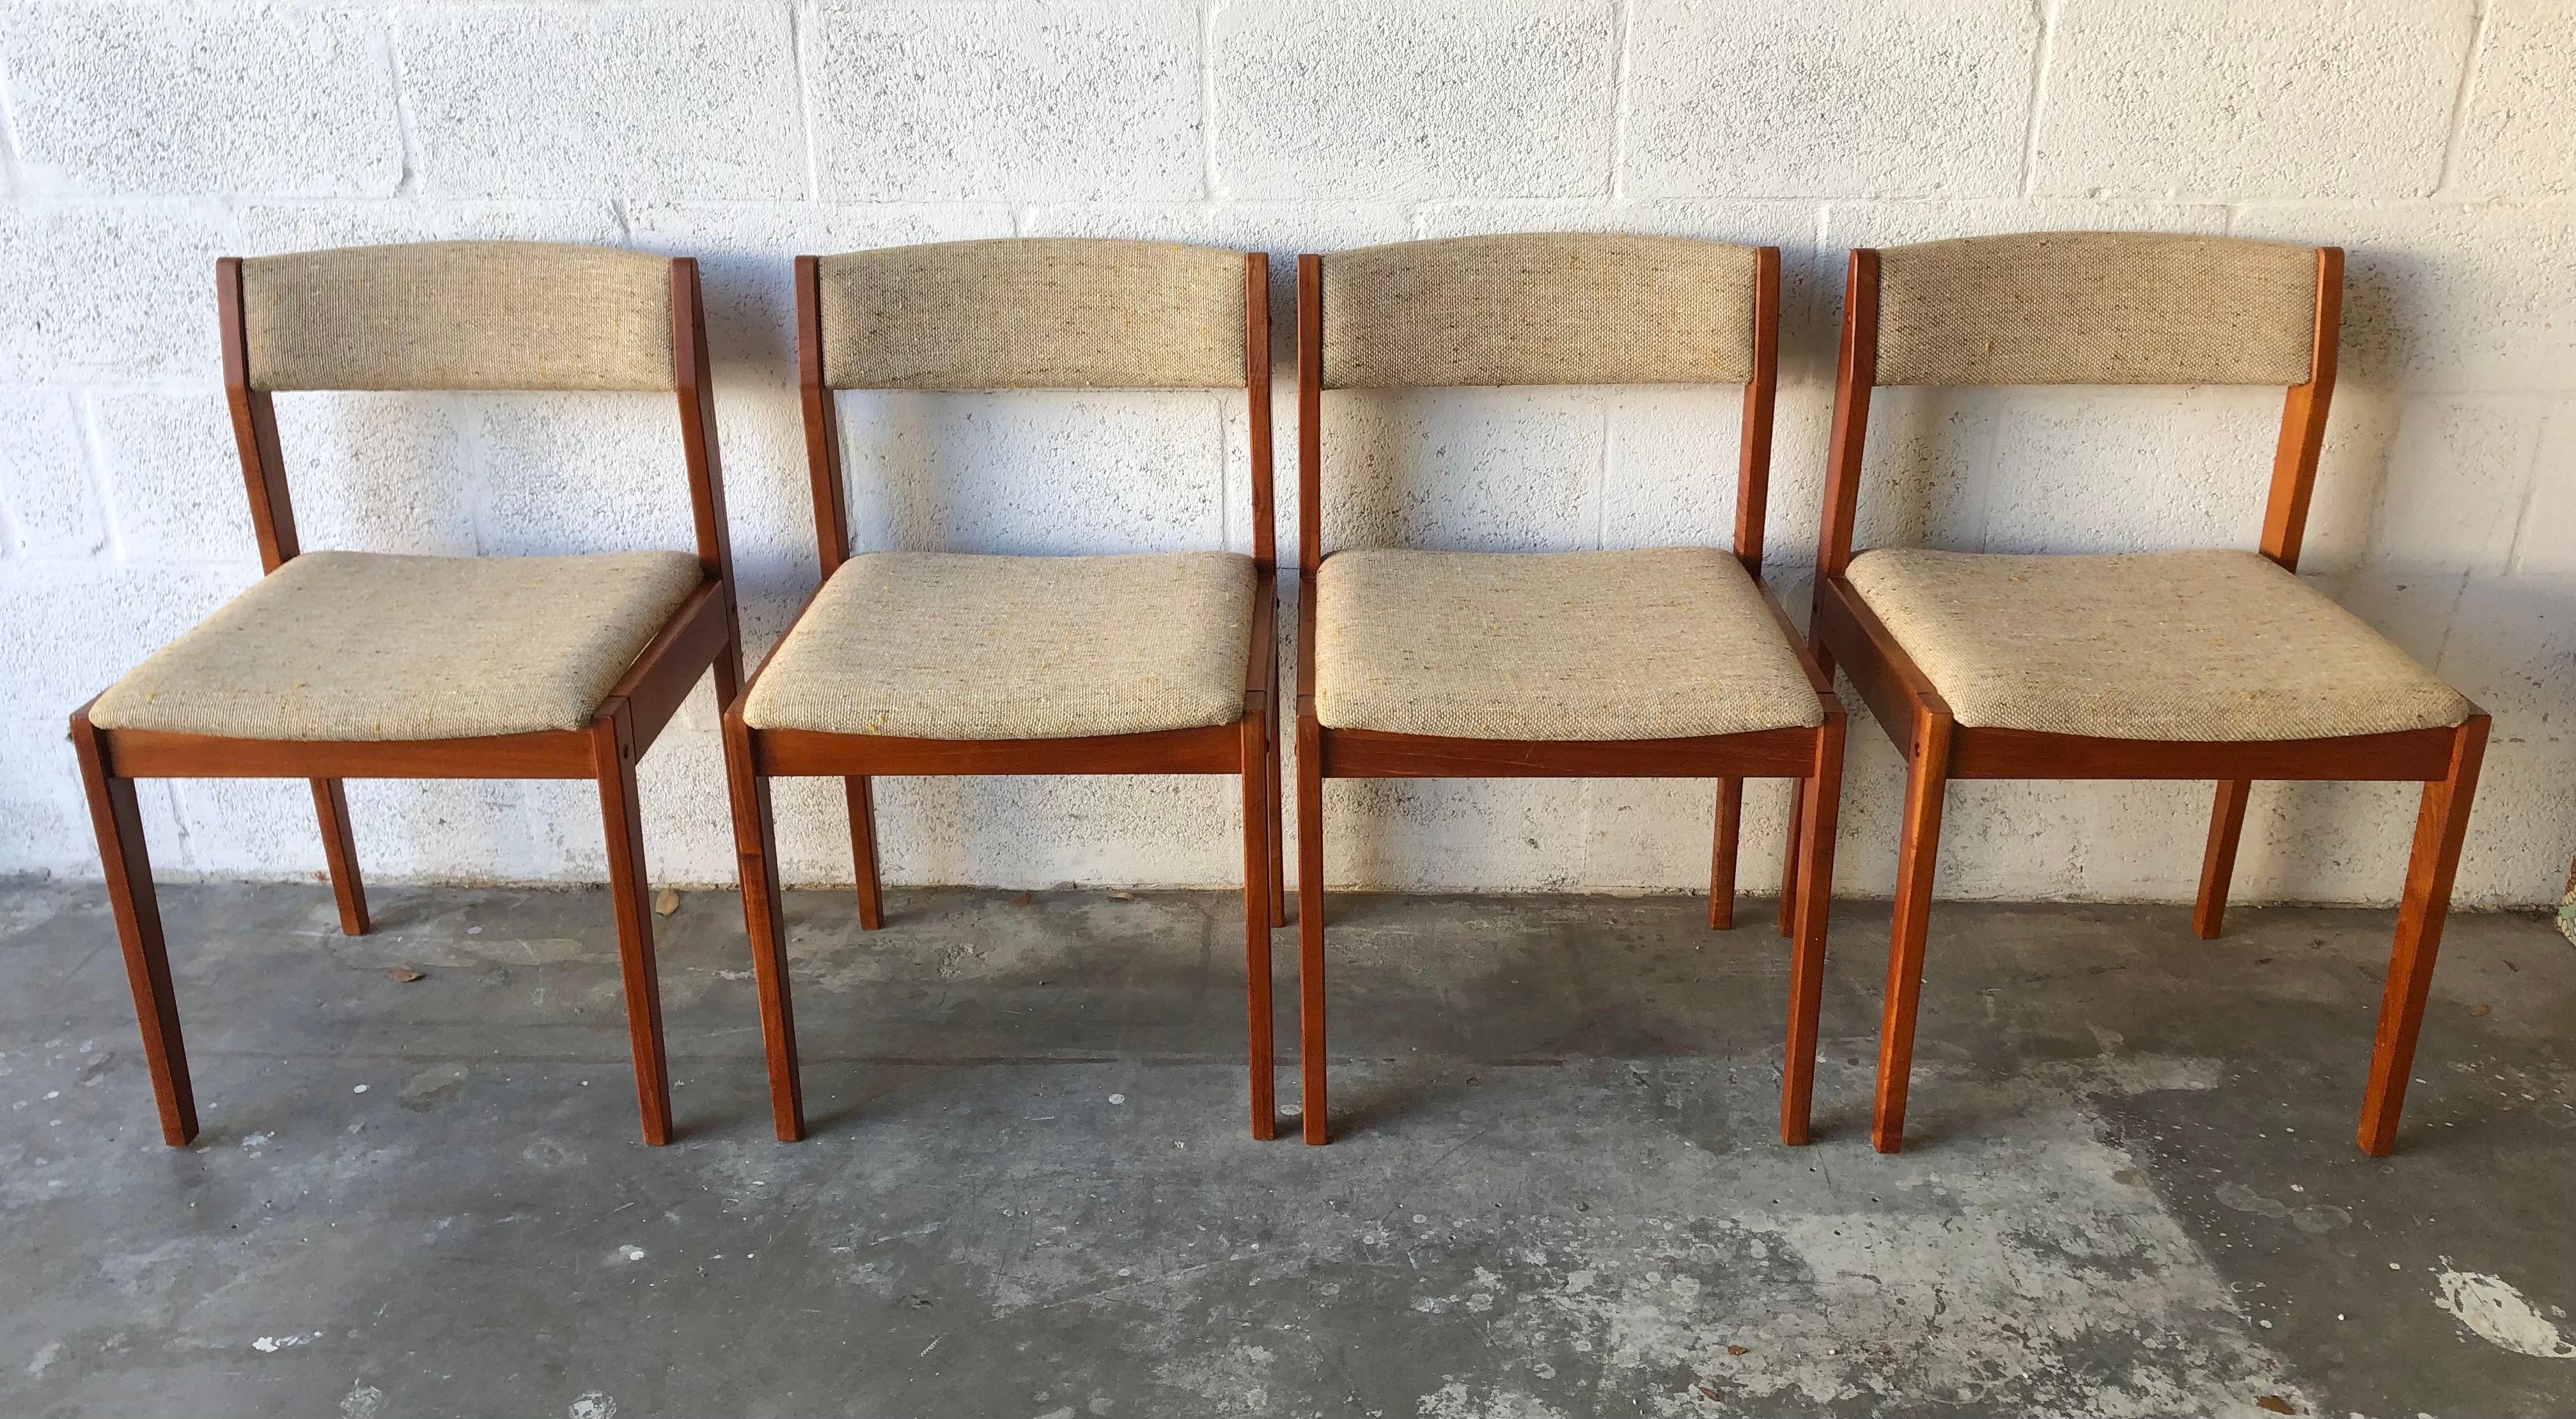 A set of four vintage mid century danish modern upholstered dining chairs by Tarm Stole OG Mobelfabrik Denmark. Circa 1970s. 
Feature sleek teaks frame with a beautiful wood grain and the original neutral colors upholstery. 
All the chairs are in